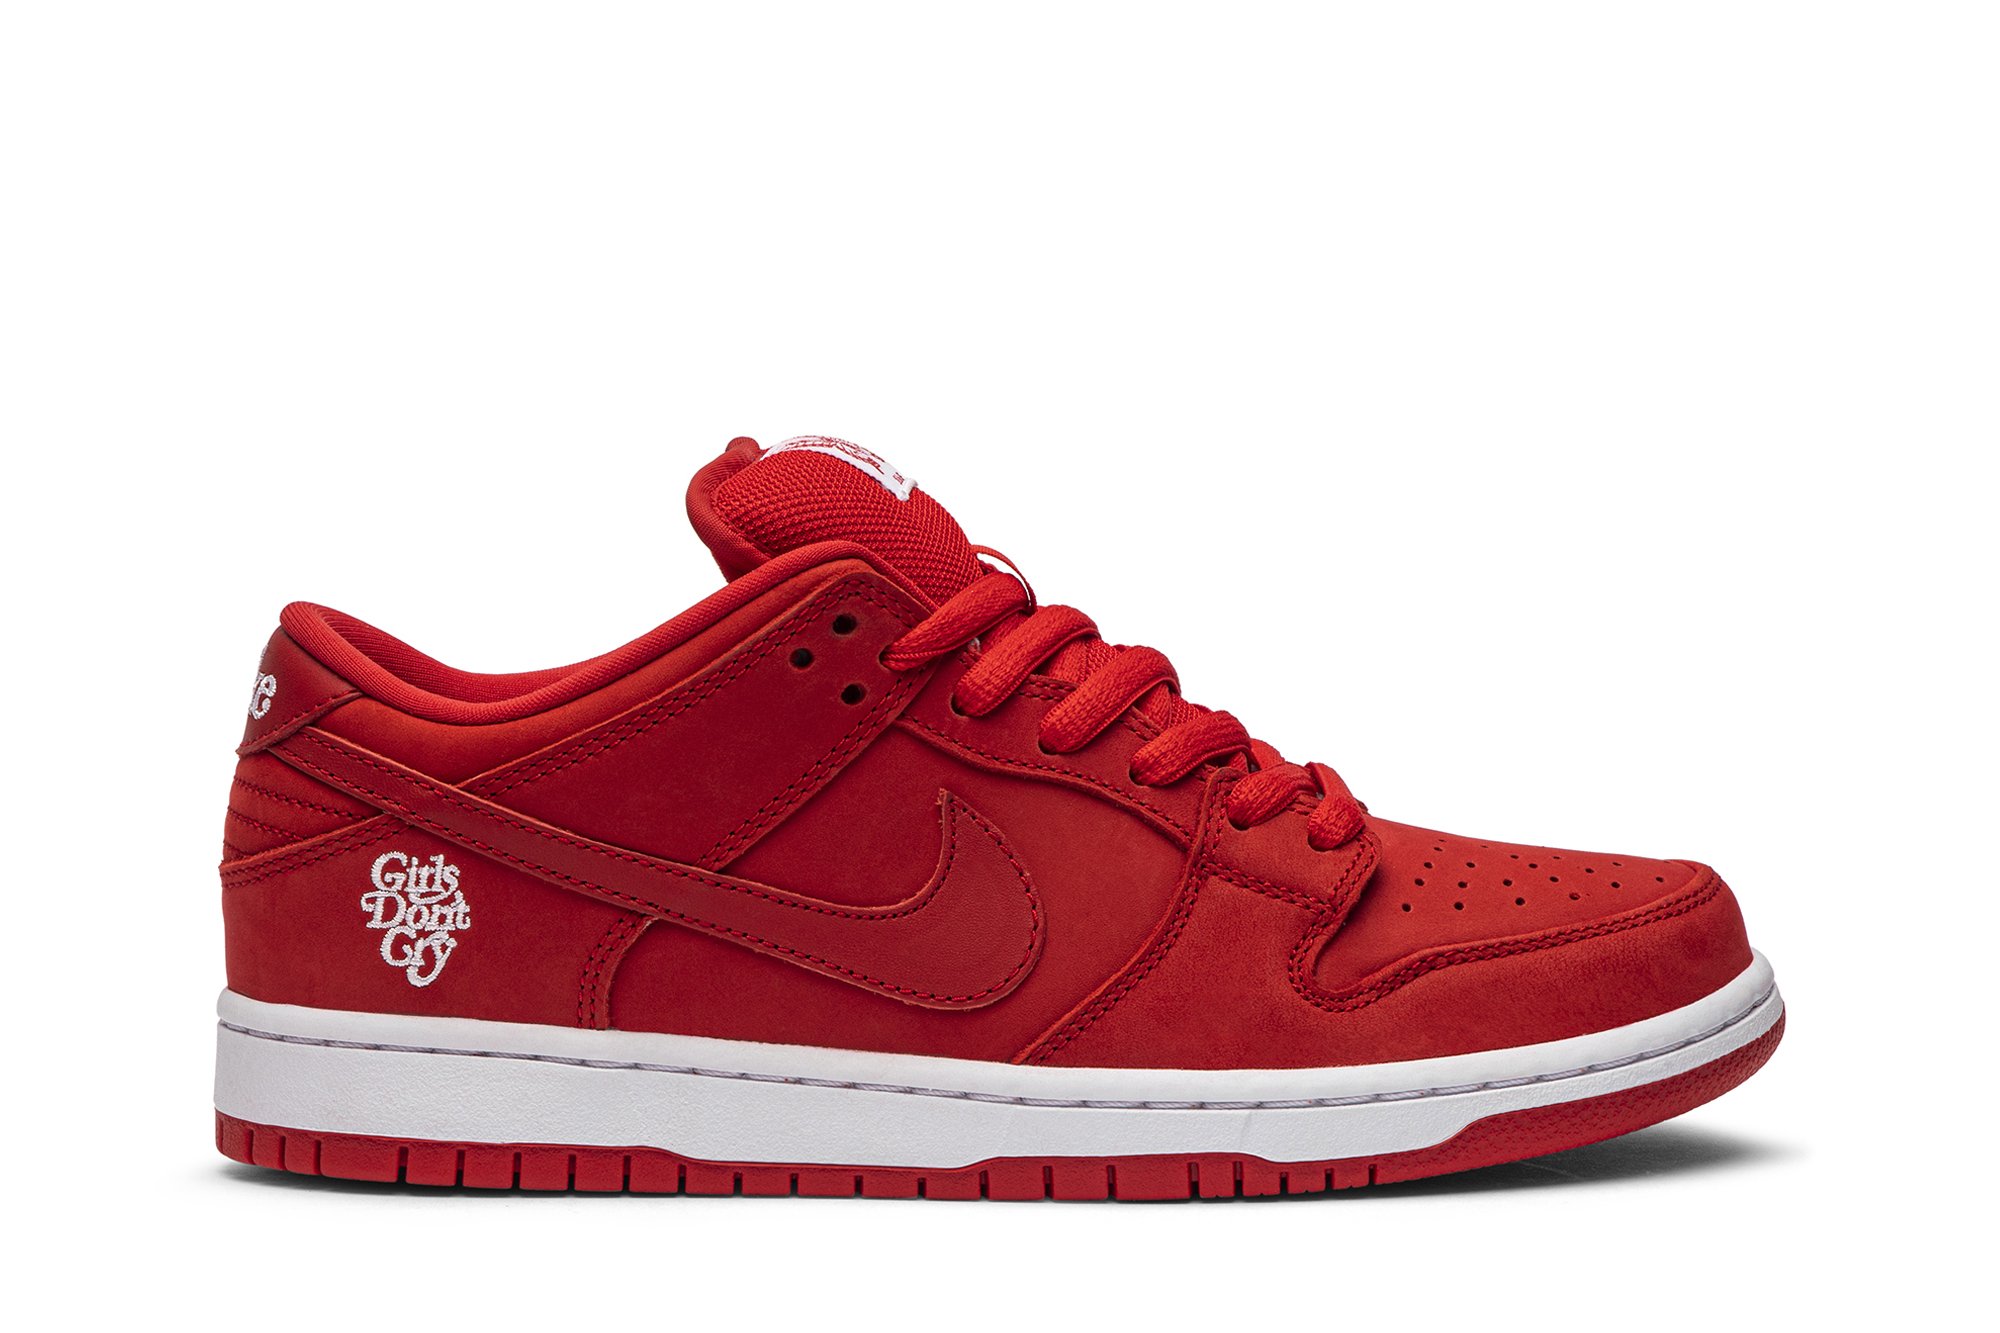 Girls Don't Cry x Dunk Low Pro SB QS 'Coming Back Home'